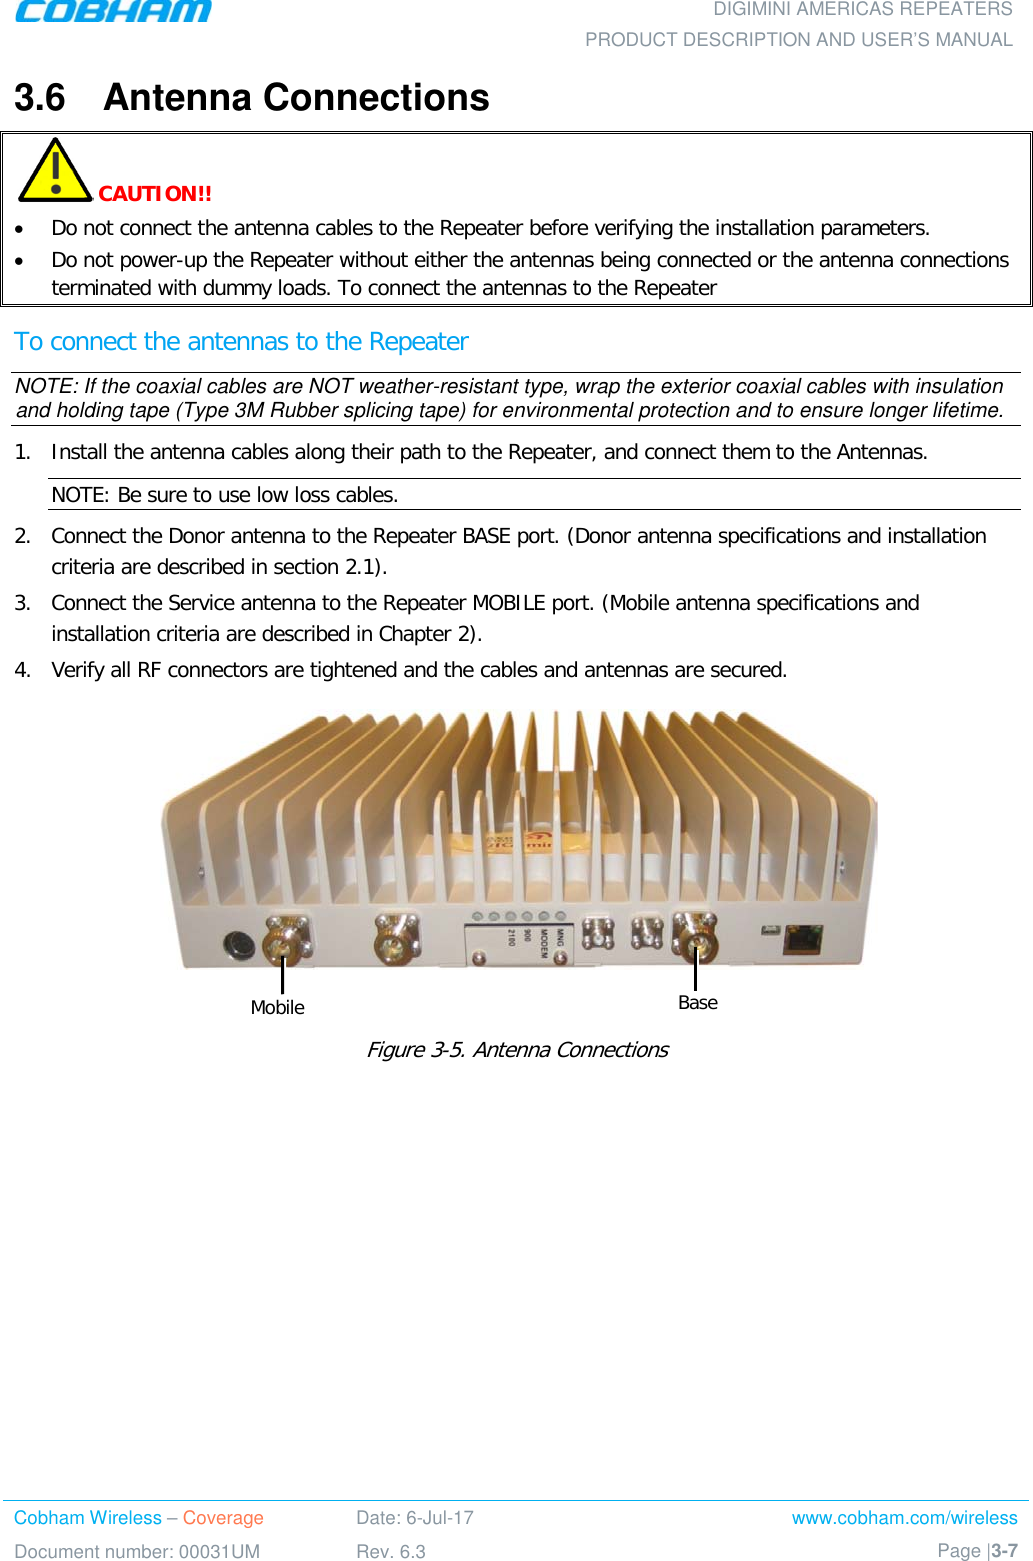  DIGIMINI AMERICAS REPEATERS PRODUCT DESCRIPTION AND USER’S MANUAL Cobham Wireless – Coverage Date: 6-Jul-17 www.cobham.com/wireless Document number: 00031UM Rev. 6.3 Page |3-7  3.6  Antenna Connections   CAUTION!!  • Do not connect the antenna cables to the Repeater before verifying the installation parameters. • Do not power-up the Repeater without either the antennas being connected or the antenna connections terminated with dummy loads. To connect the antennas to the Repeater To connect the antennas to the Repeater NOTE: If the coaxial cables are NOT weather-resistant type, wrap the exterior coaxial cables with insulation and holding tape (Type 3M Rubber splicing tape) for environmental protection and to ensure longer lifetime. 1.  Install the antenna cables along their path to the Repeater, and connect them to the Antennas. NOTE: Be sure to use low loss cables. 2.  Connect the Donor antenna to the Repeater BASE port. (Donor antenna specifications and installation criteria are described in section  2.1). 3.  Connect the Service antenna to the Repeater MOBILE port. (Mobile antenna specifications and installation criteria are described in Chapter  2). 4.  Verify all RF connectors are tightened and the cables and antennas are secured.   Figure  3-5. Antenna Connections    Mobile Base 